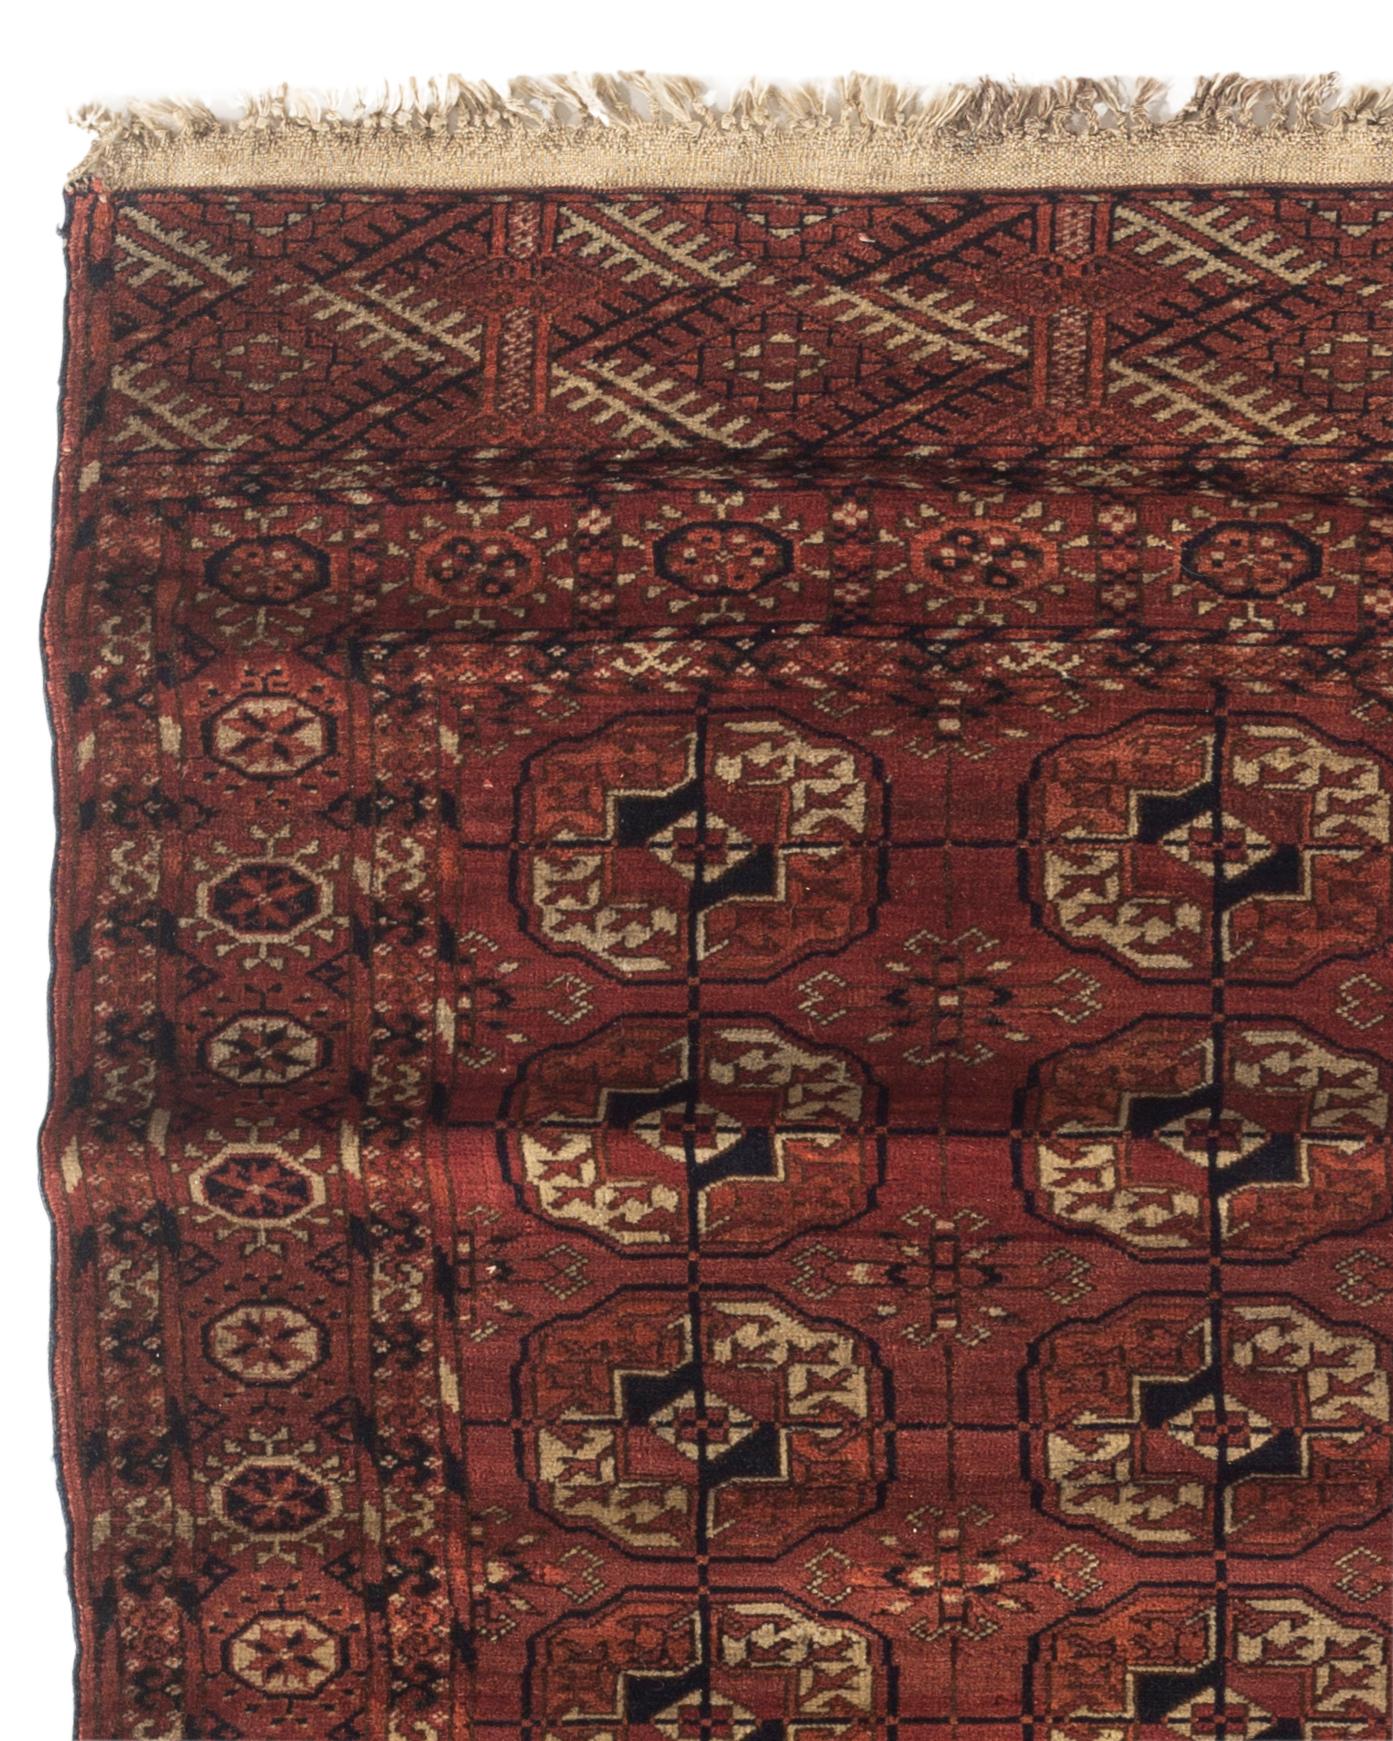 Antique Bokhara Rug, circa 1890. Bokara or Bokhara rugs are named after the city where they were sold. These rugs were made by Turkoman tribes, and these weavers gave the rug its distinctive design. At the end of the 20th century, carpet weaving in